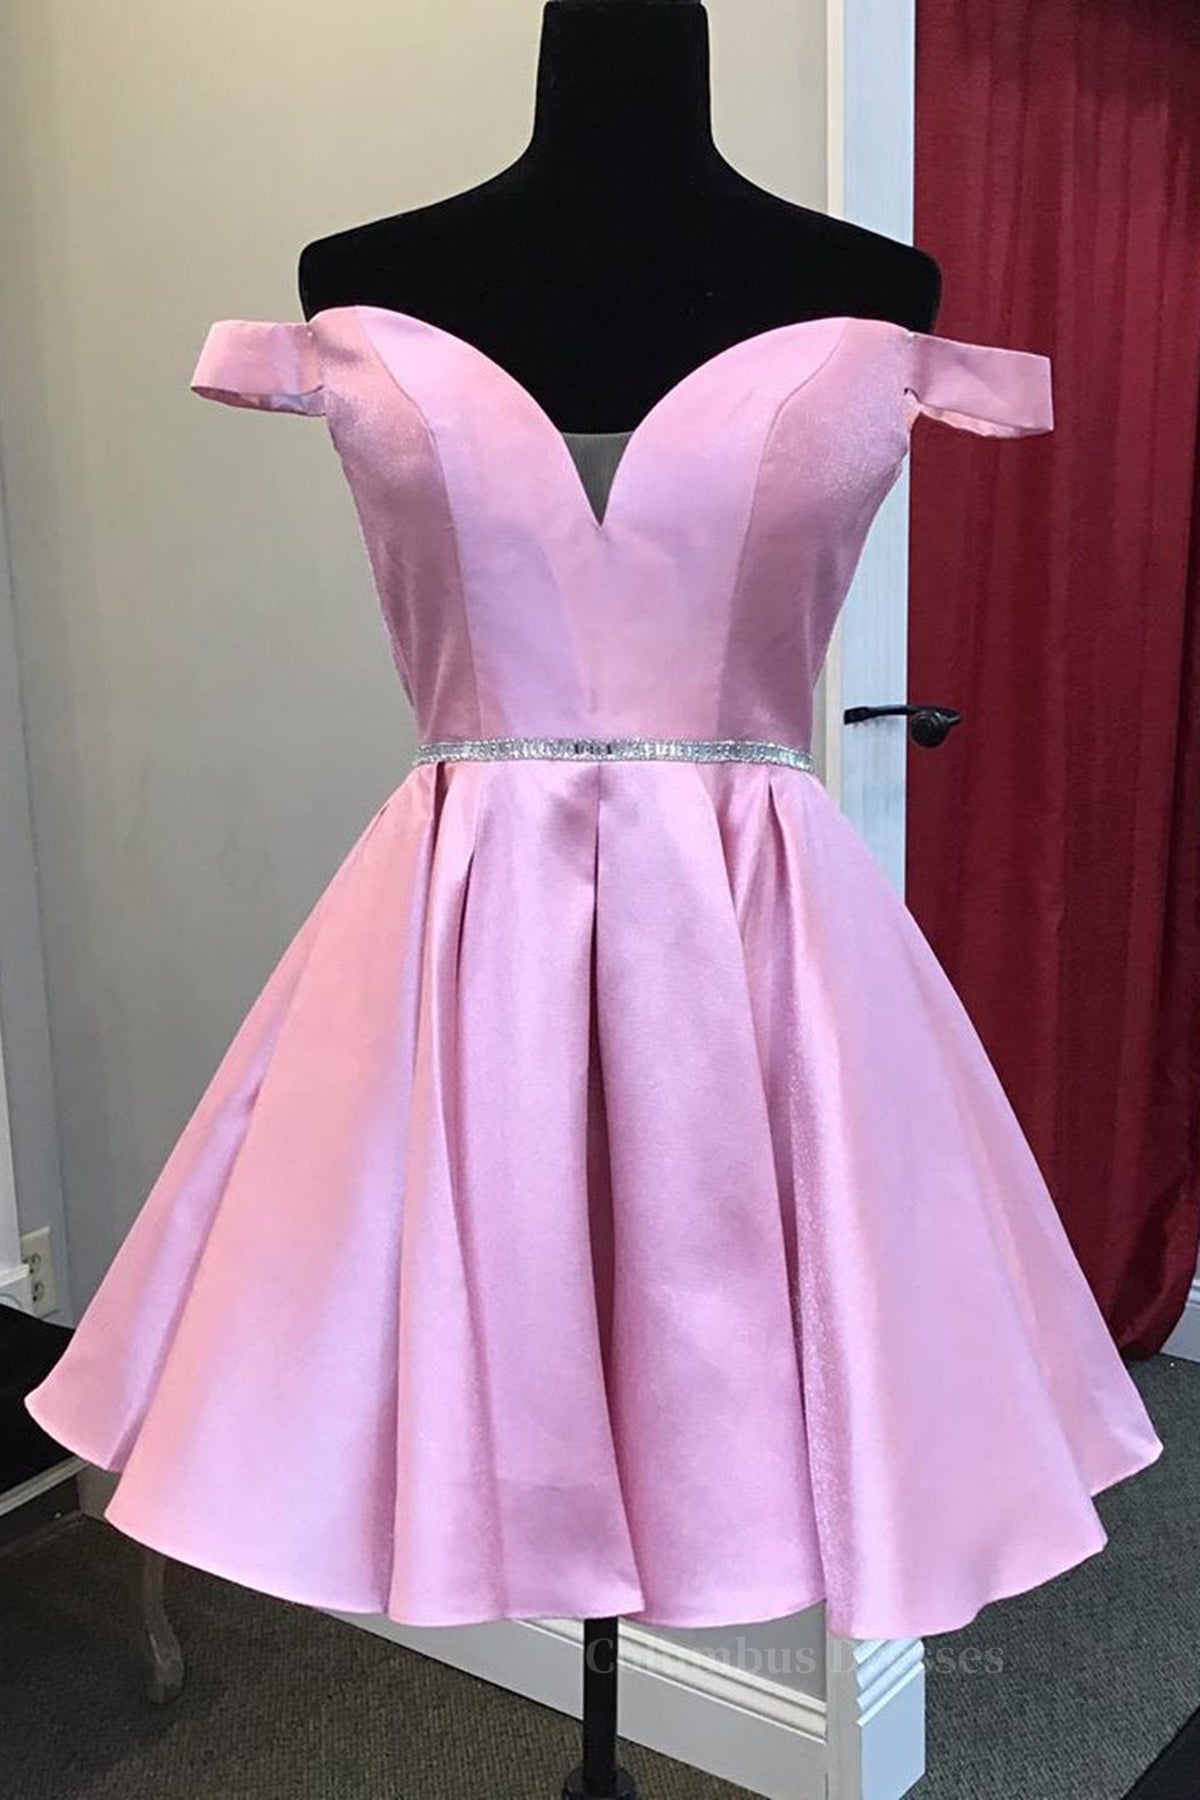 Bridesmaid Dresses In Store, Off the Shoulder Pink Satin Short Prom Homecoming Dress with Belt, Off Shoulder Pink Formal Graduation Evening Dress